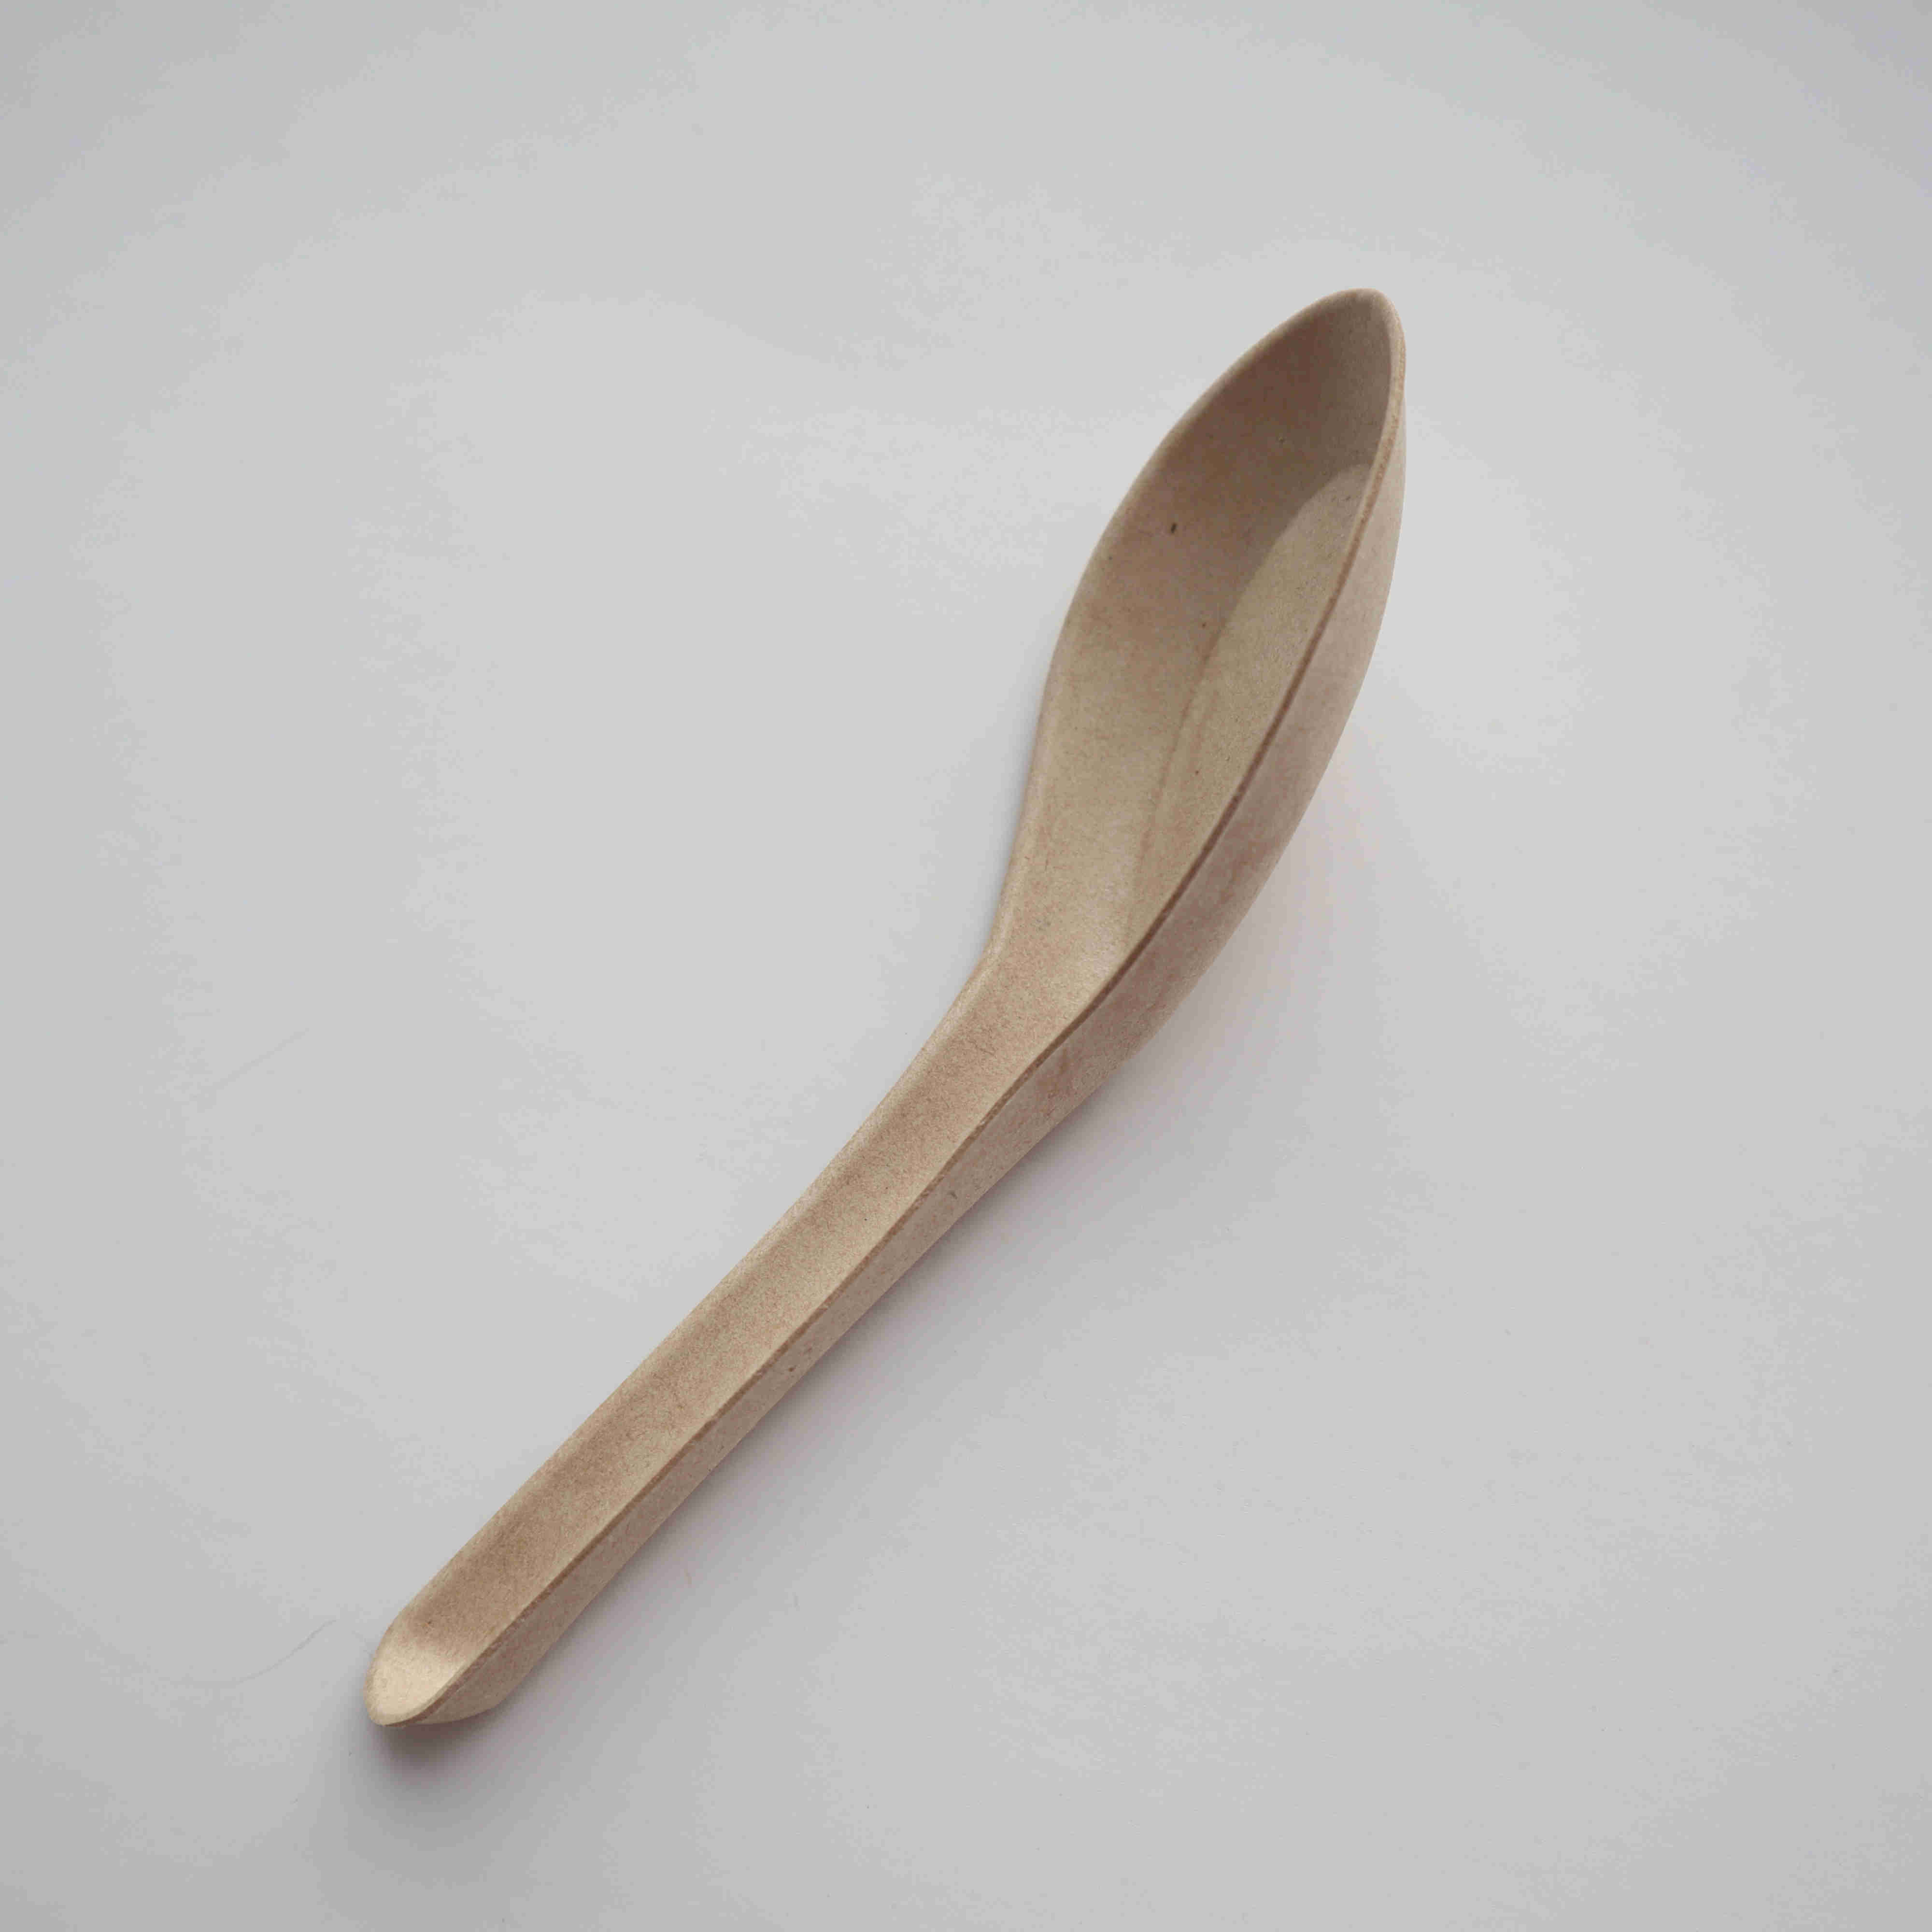 Sugarcane Chinese soup spoon, compostable and biodegradable